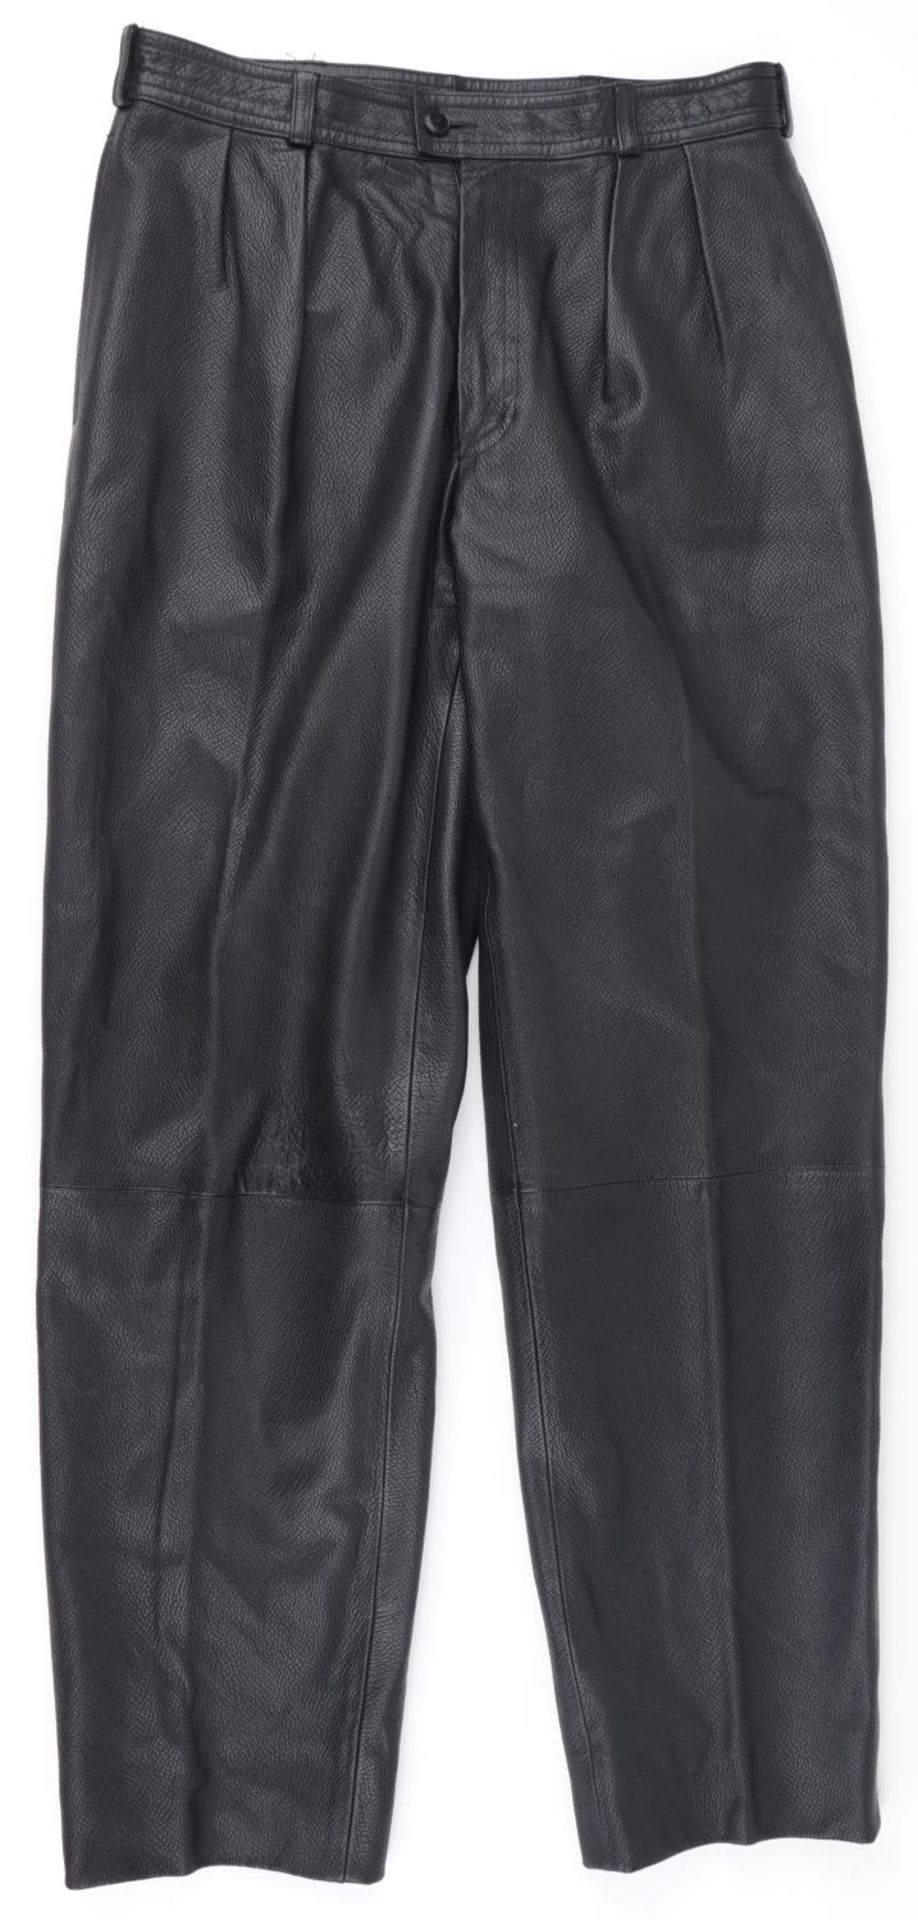 Yves Saint Laurent, Pair of vintage French Rive Gauche leather trousers, size 5